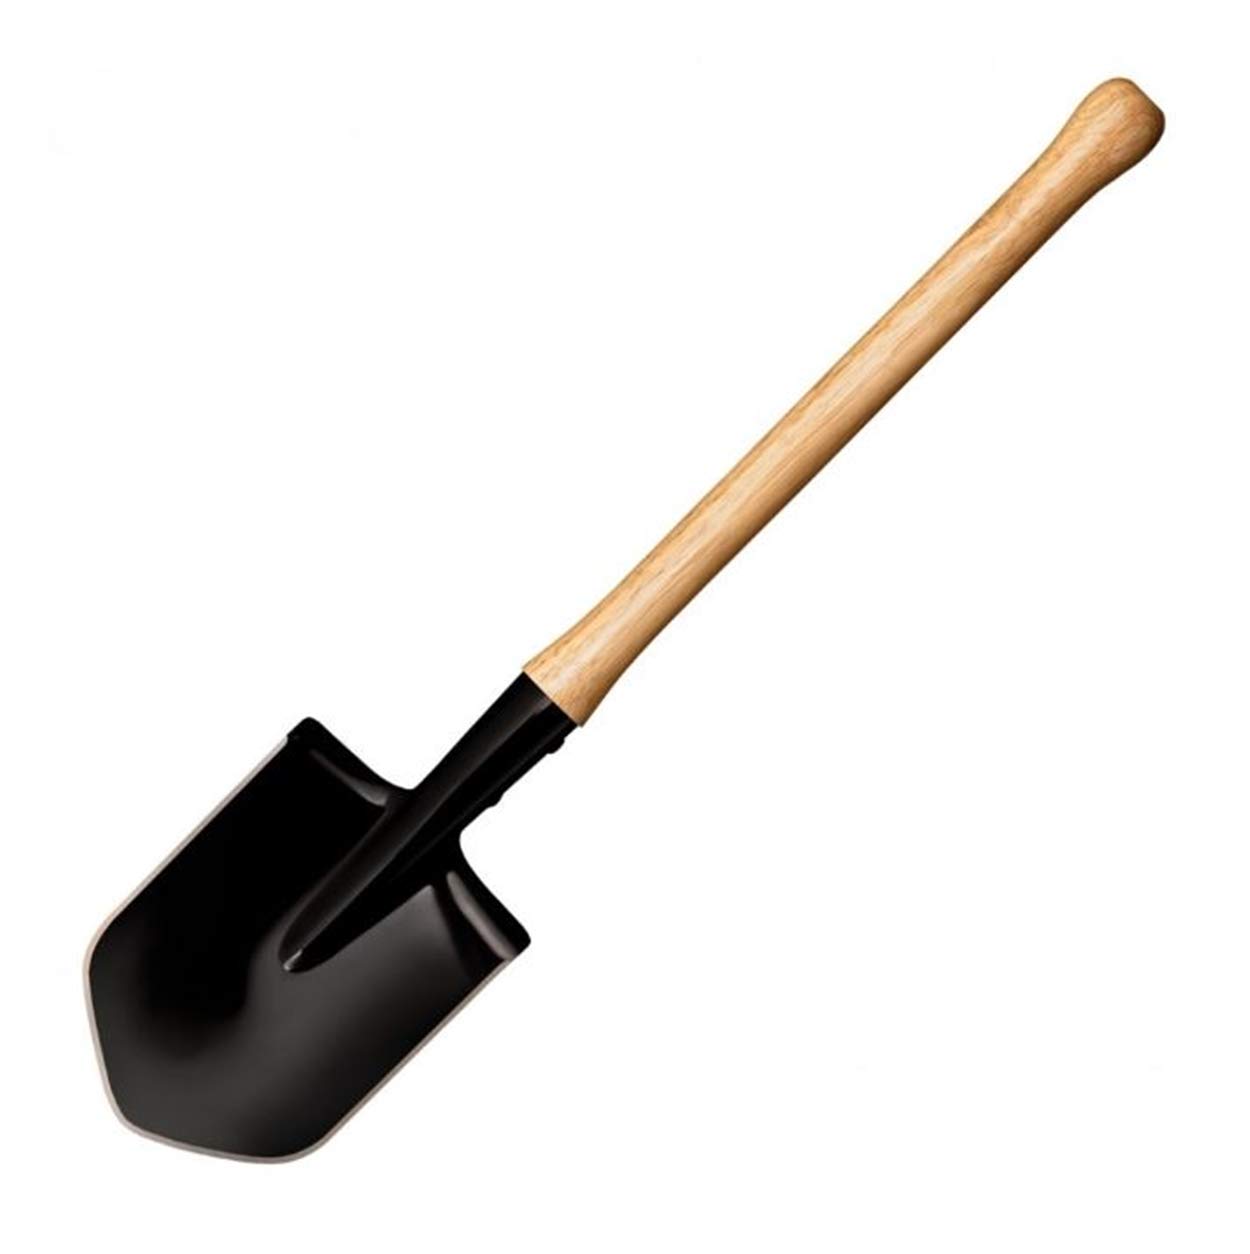 30" Cold Steel Spetsnaz Tactical Camp Trench Shovel w/ Hickory Wood Handle $20.20 + Free Ship with Prime